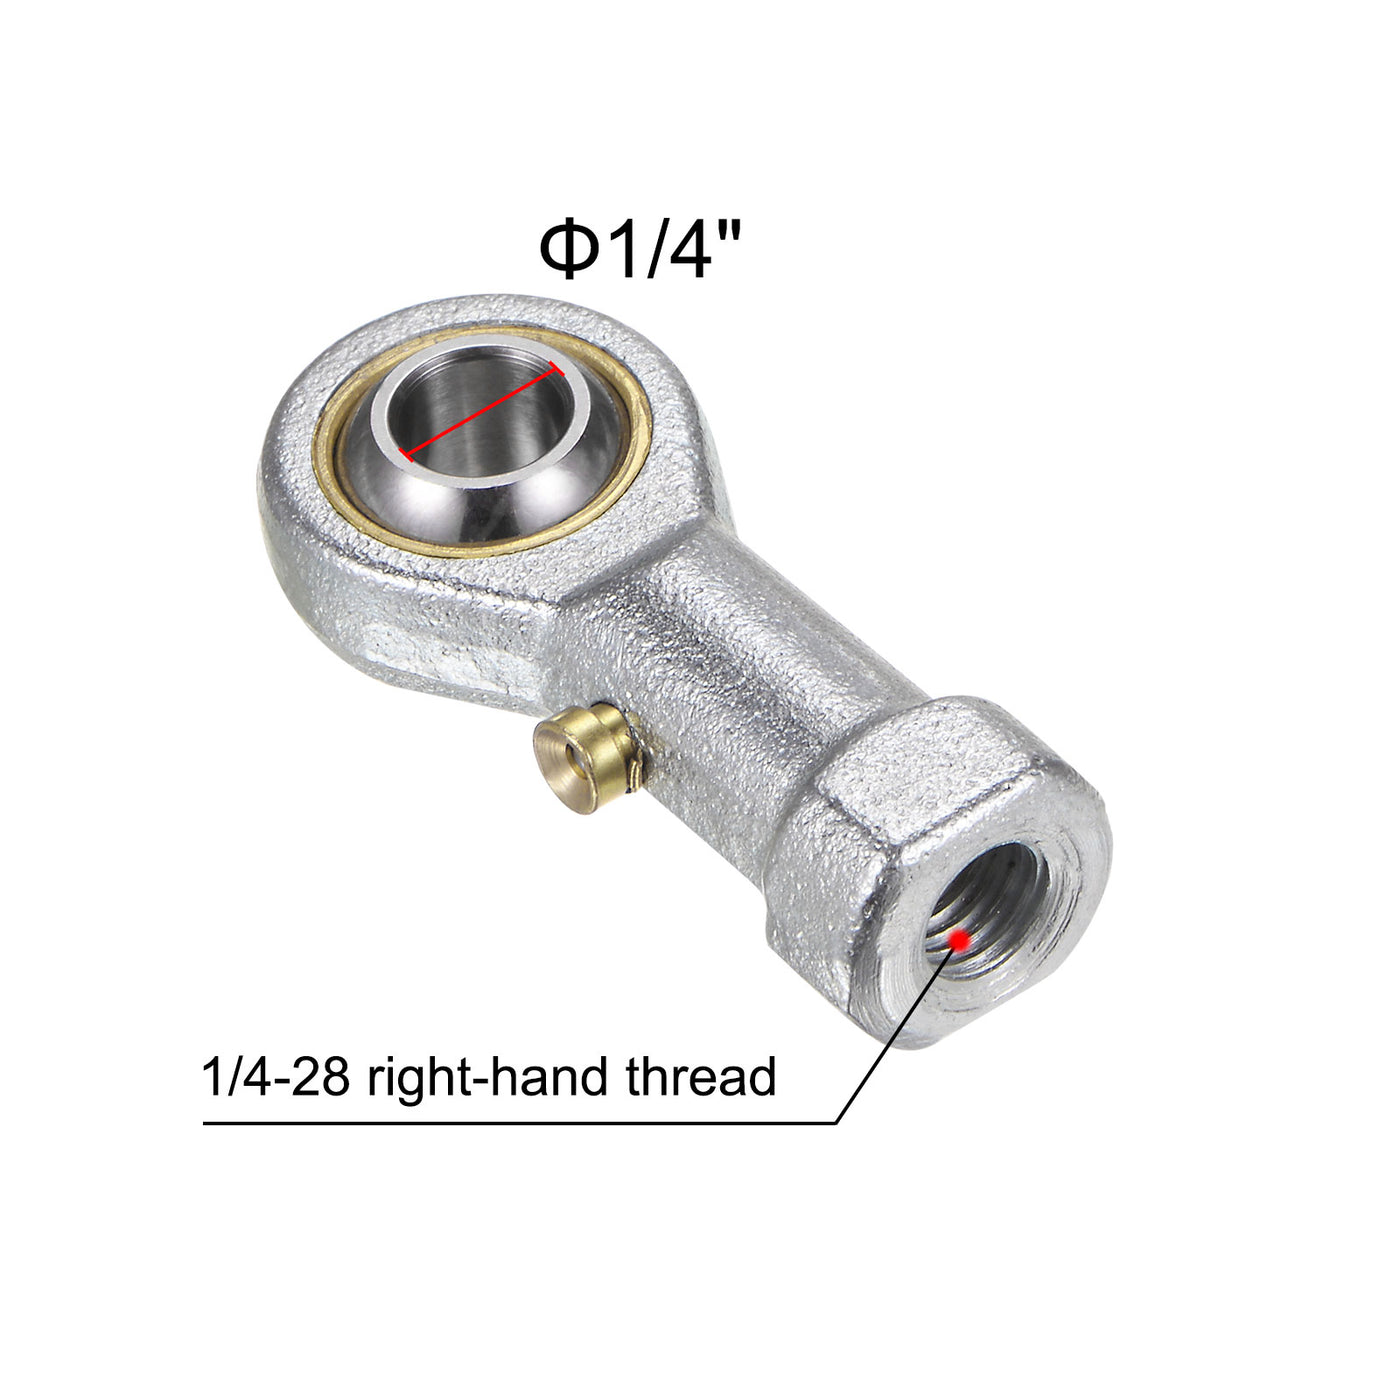 uxcell Uxcell 2pcs PHSB4 Female Rod End 1/4" Bore and 1/4-28 Right Hand Thread with Jam Nut